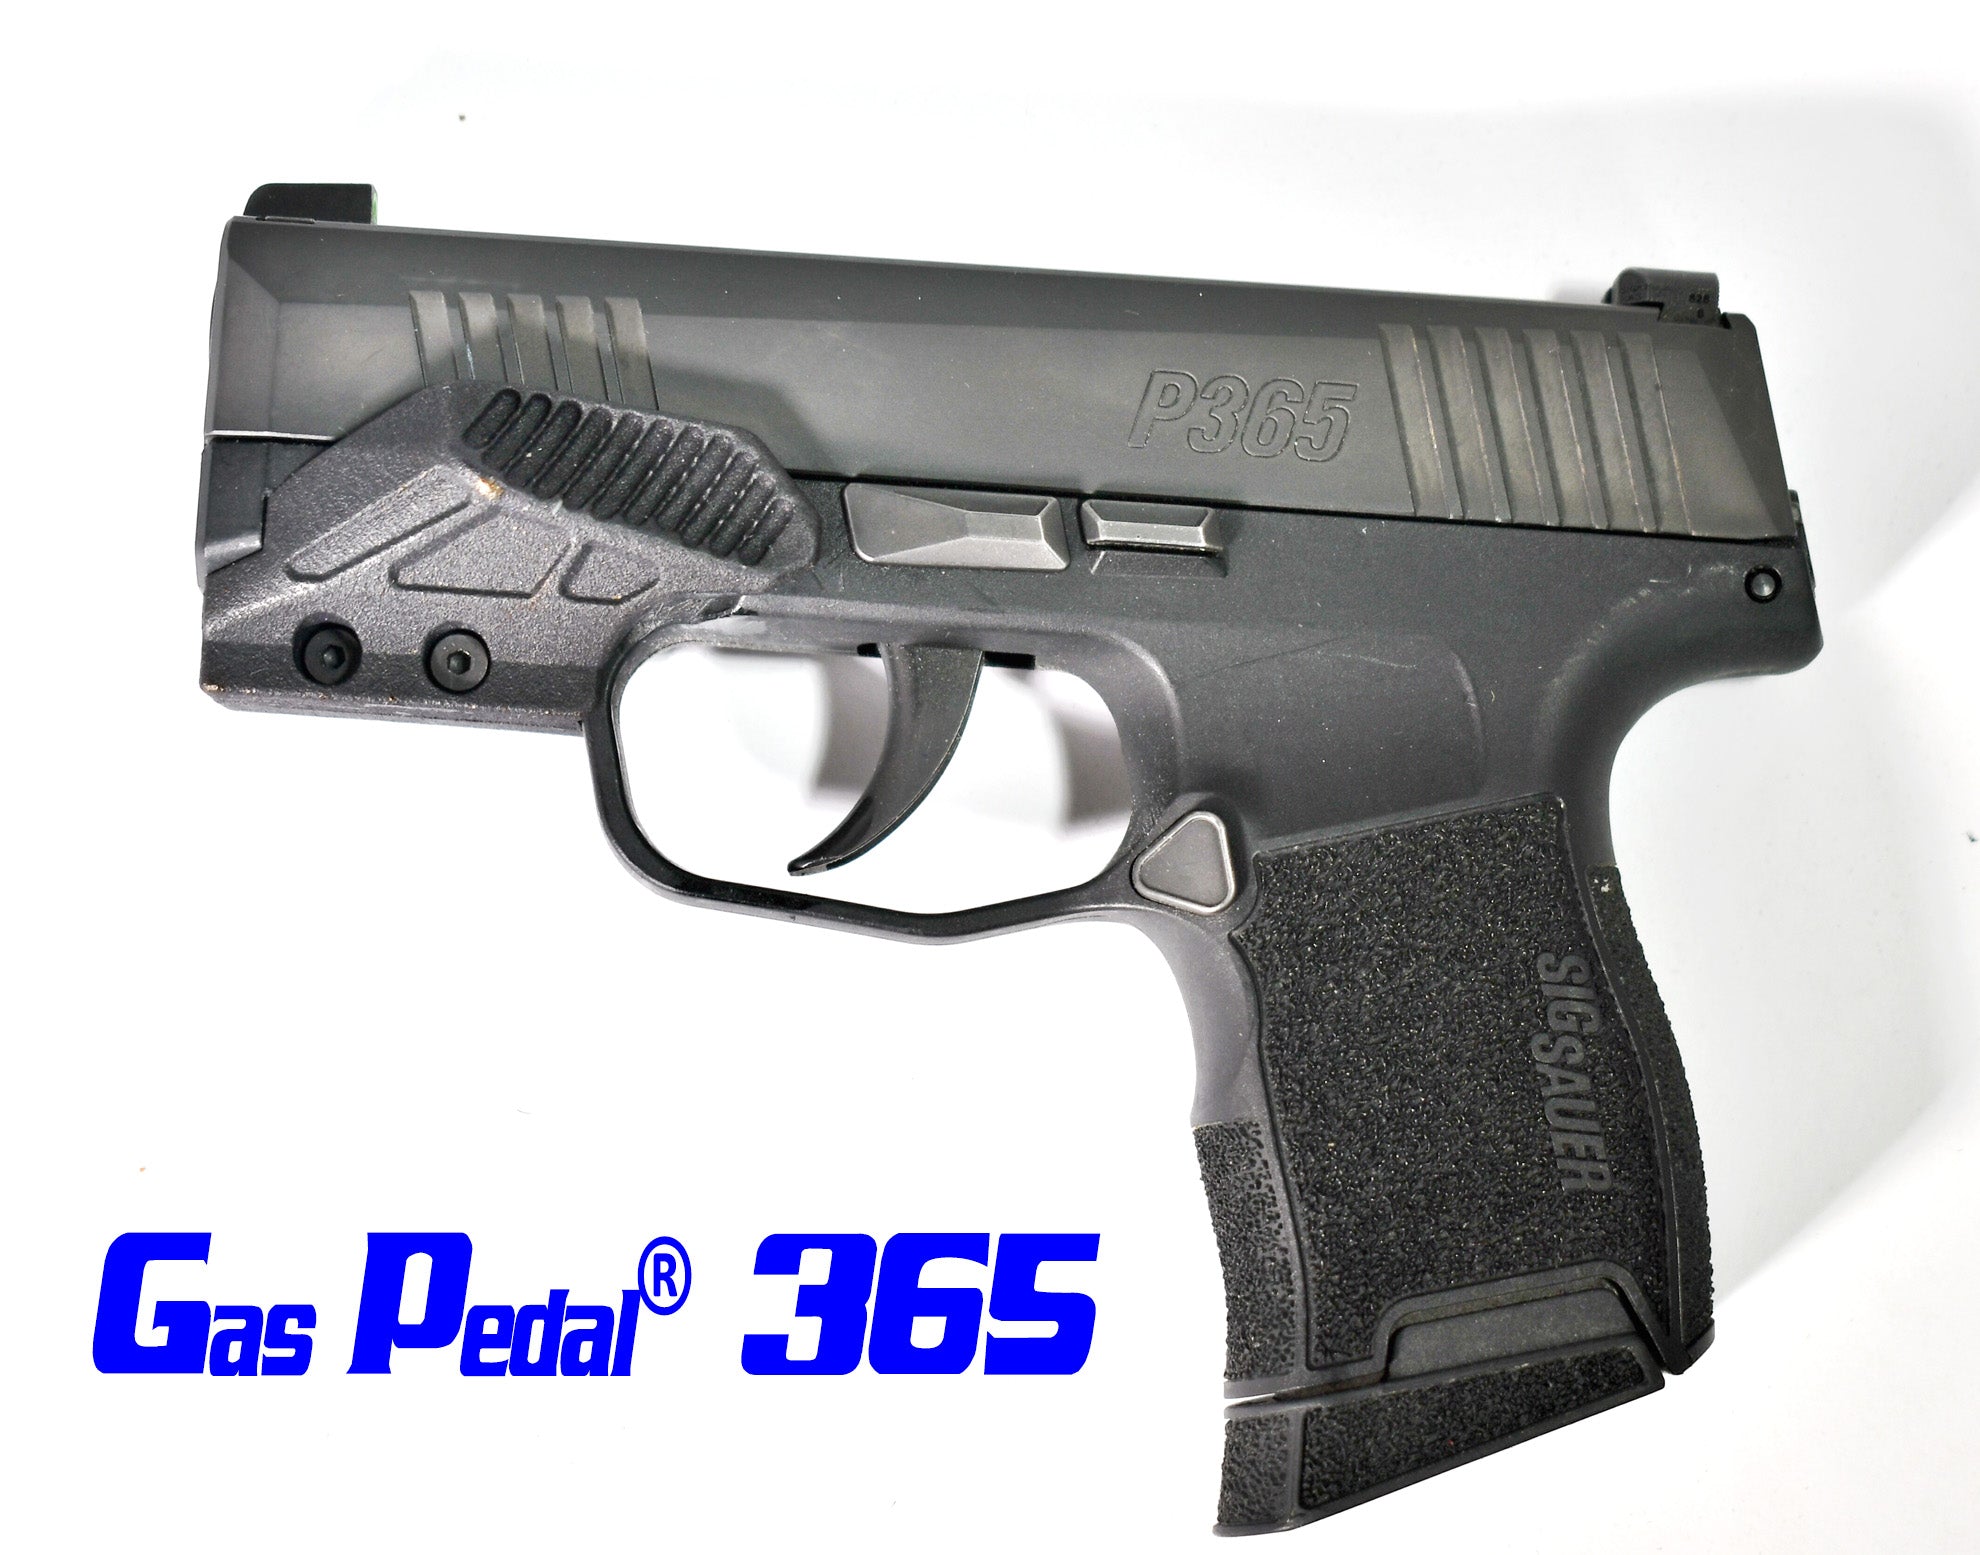 Gas Pedal® 365 for Sig P365 mounted on Gun